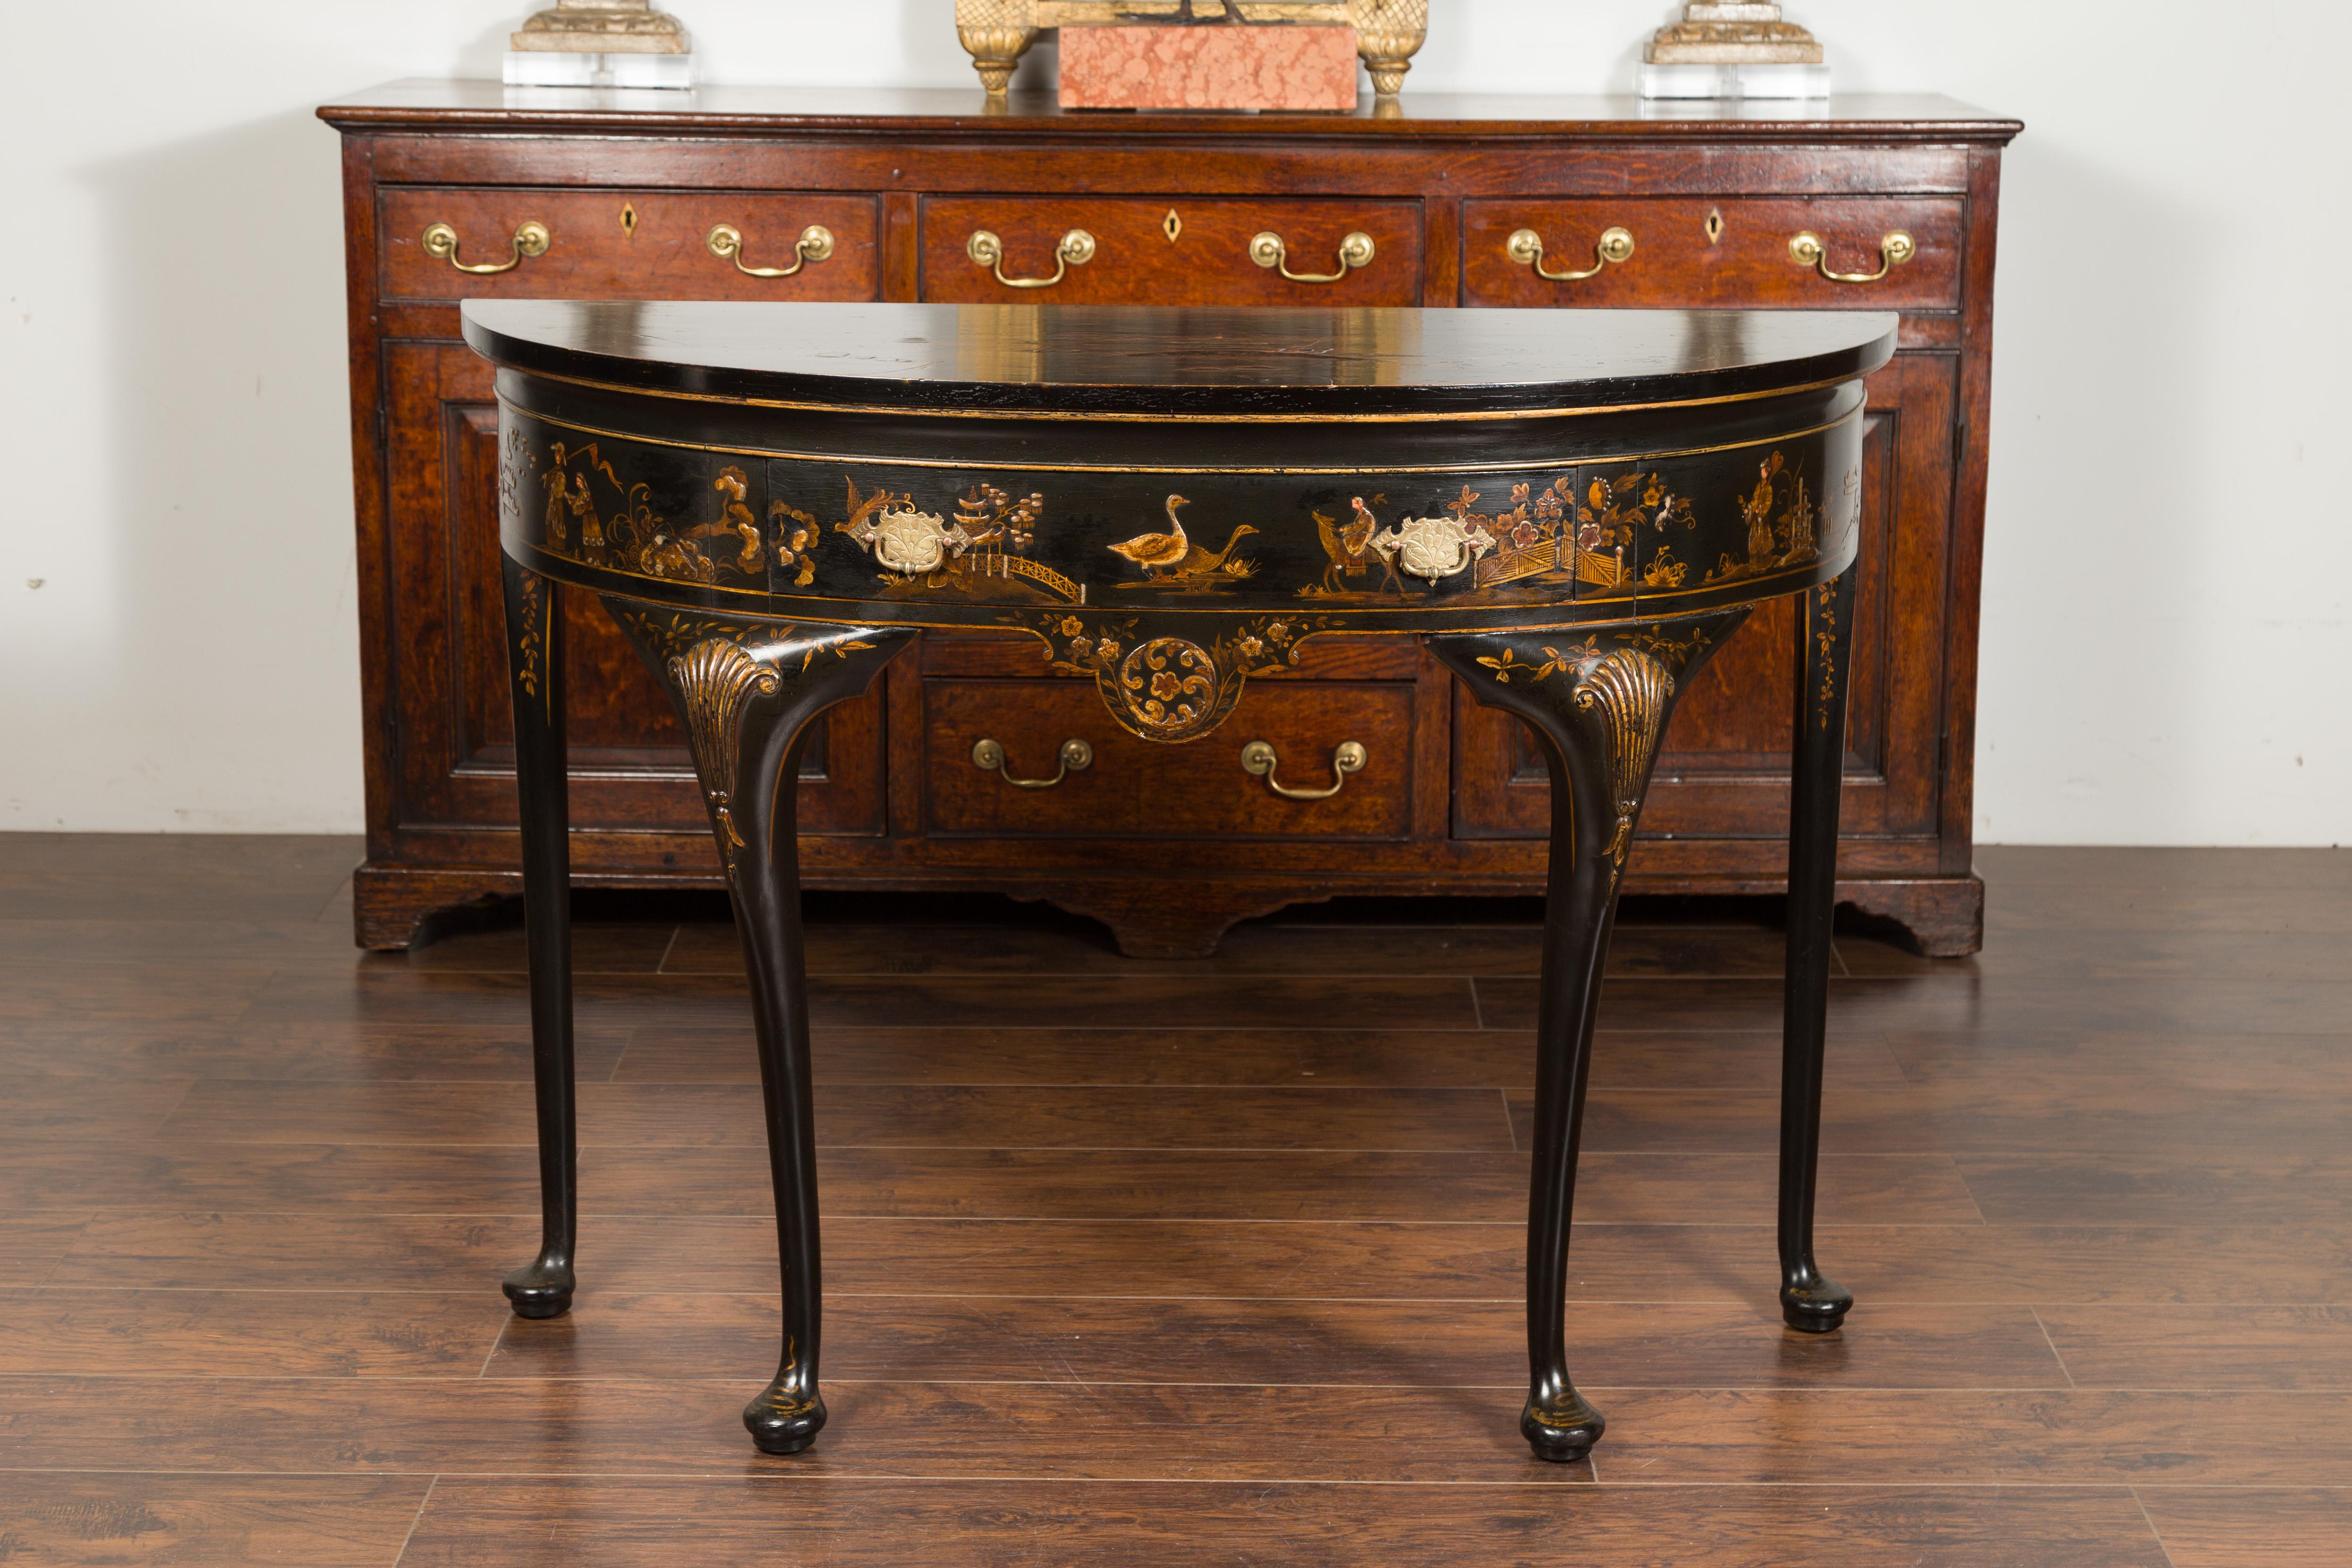 An English black and gold demilune table from the early 20th century, with chinoiserie decor and single drawer. Created in England during the early years of the 20th century, this demilune features a semi-circular top sitting above a single drawer